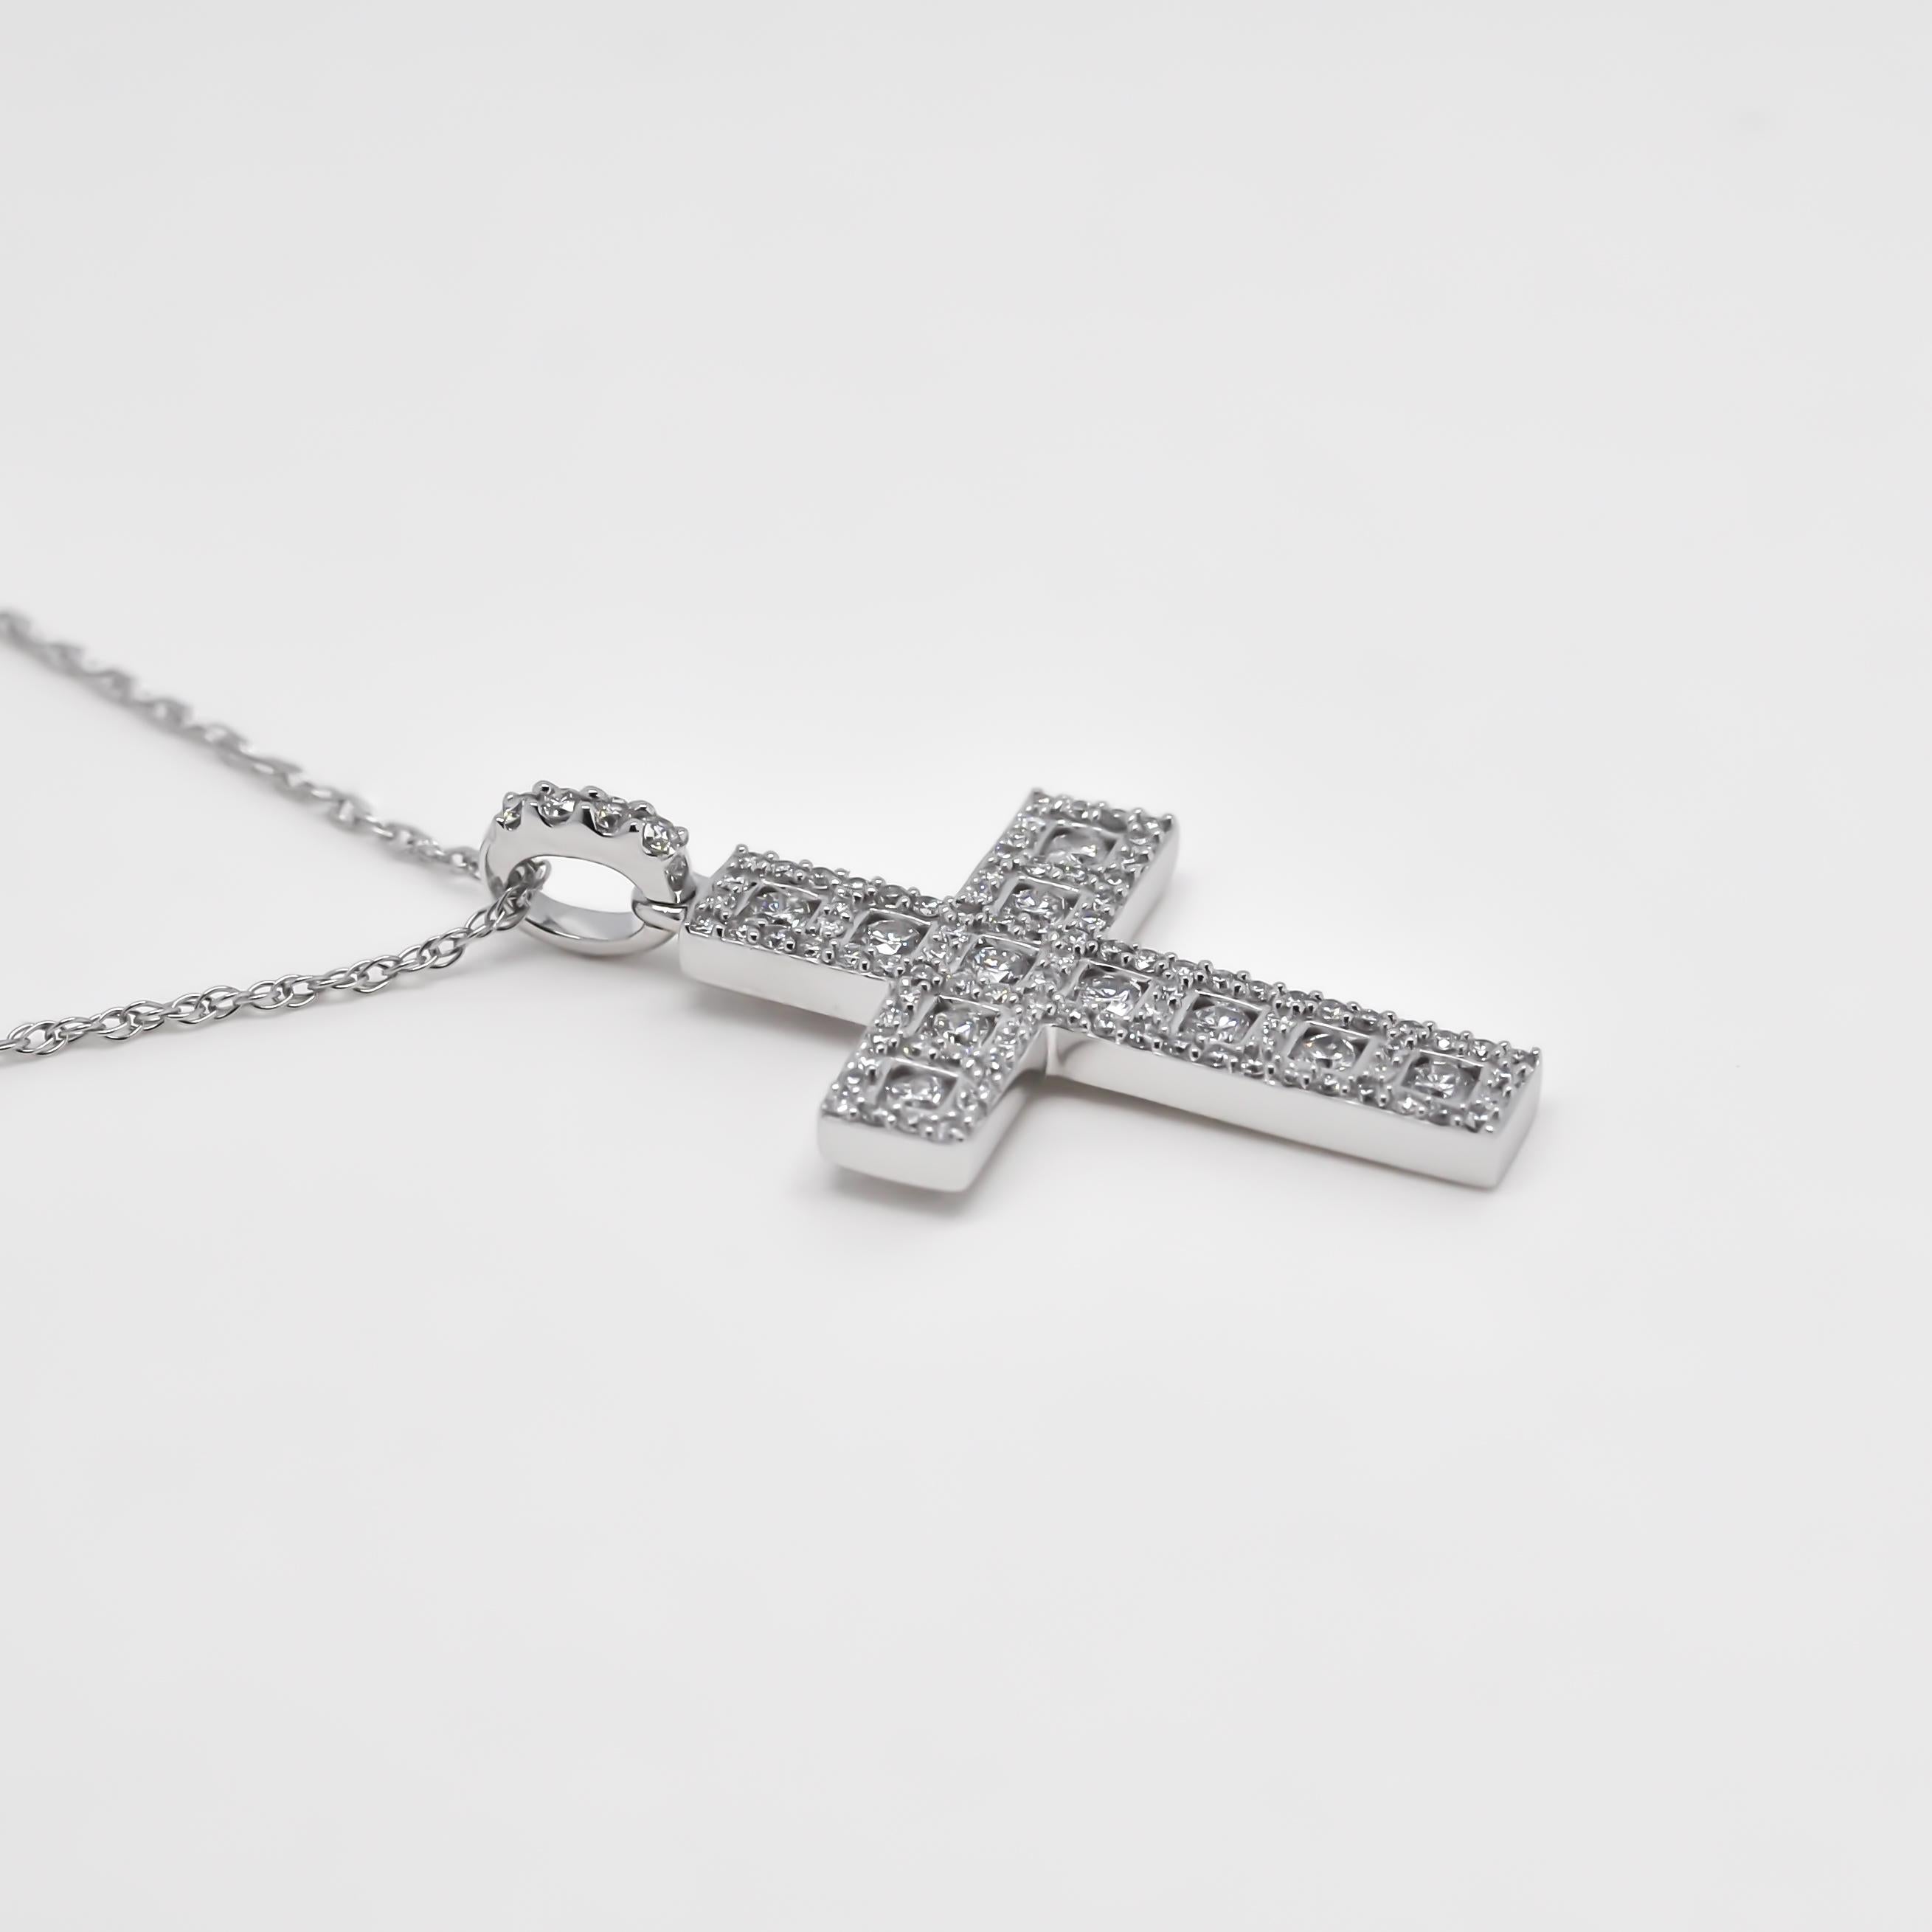 This exquisite piece of jewelry blends vintage charm with contemporary elegance, creating a truly captivating pendant necklace.

Crafted with utmost precision and artistry, this pendant features a vintage-inspired cross crucifix design, exuding